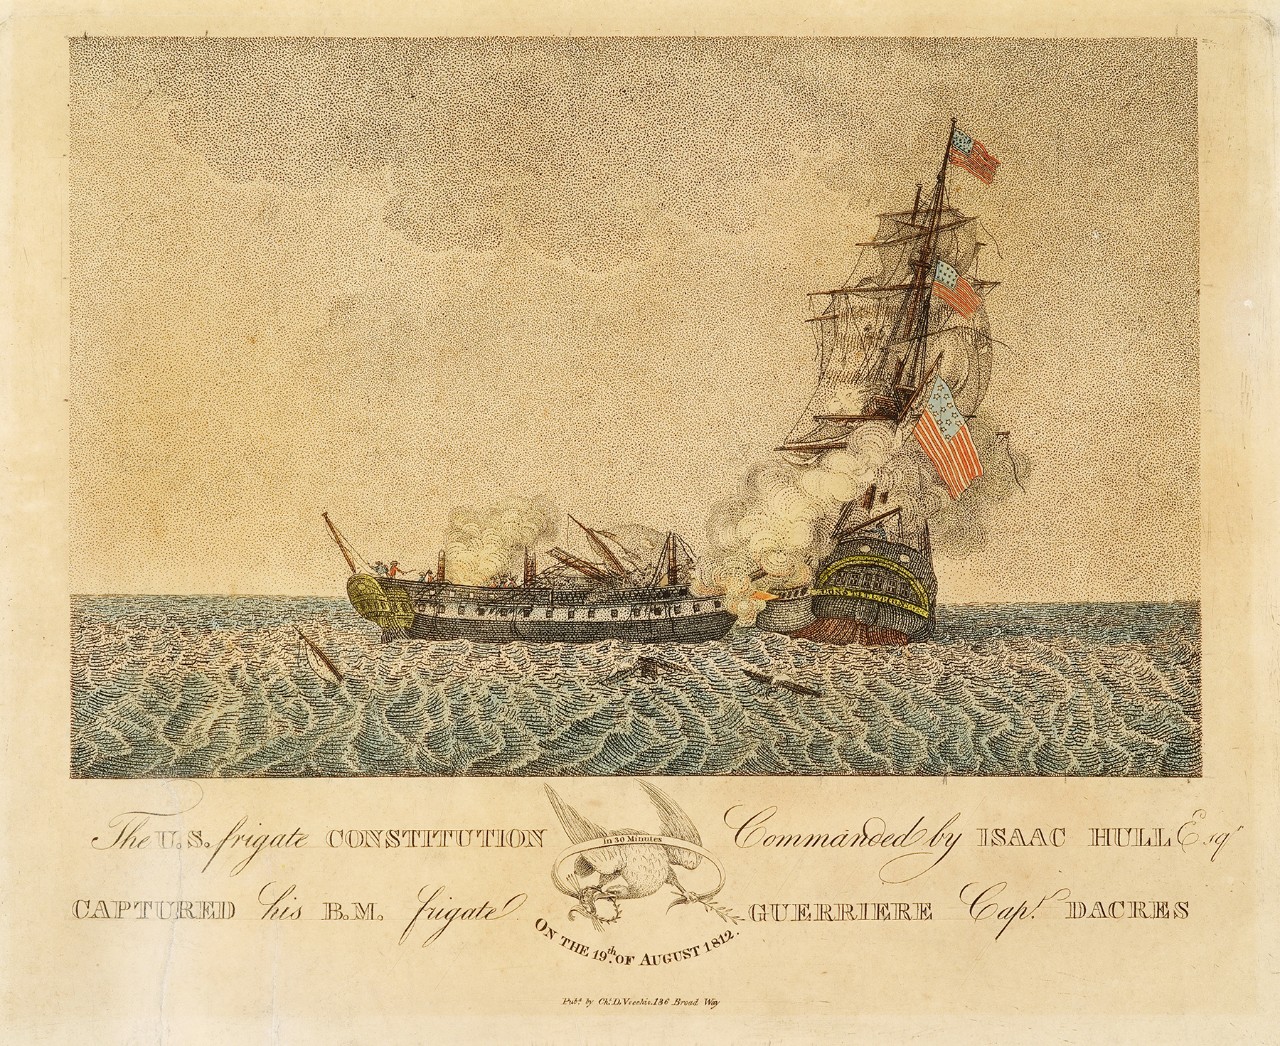 The ship on the right is broadside to the ship on the left, which is demasted and smoking